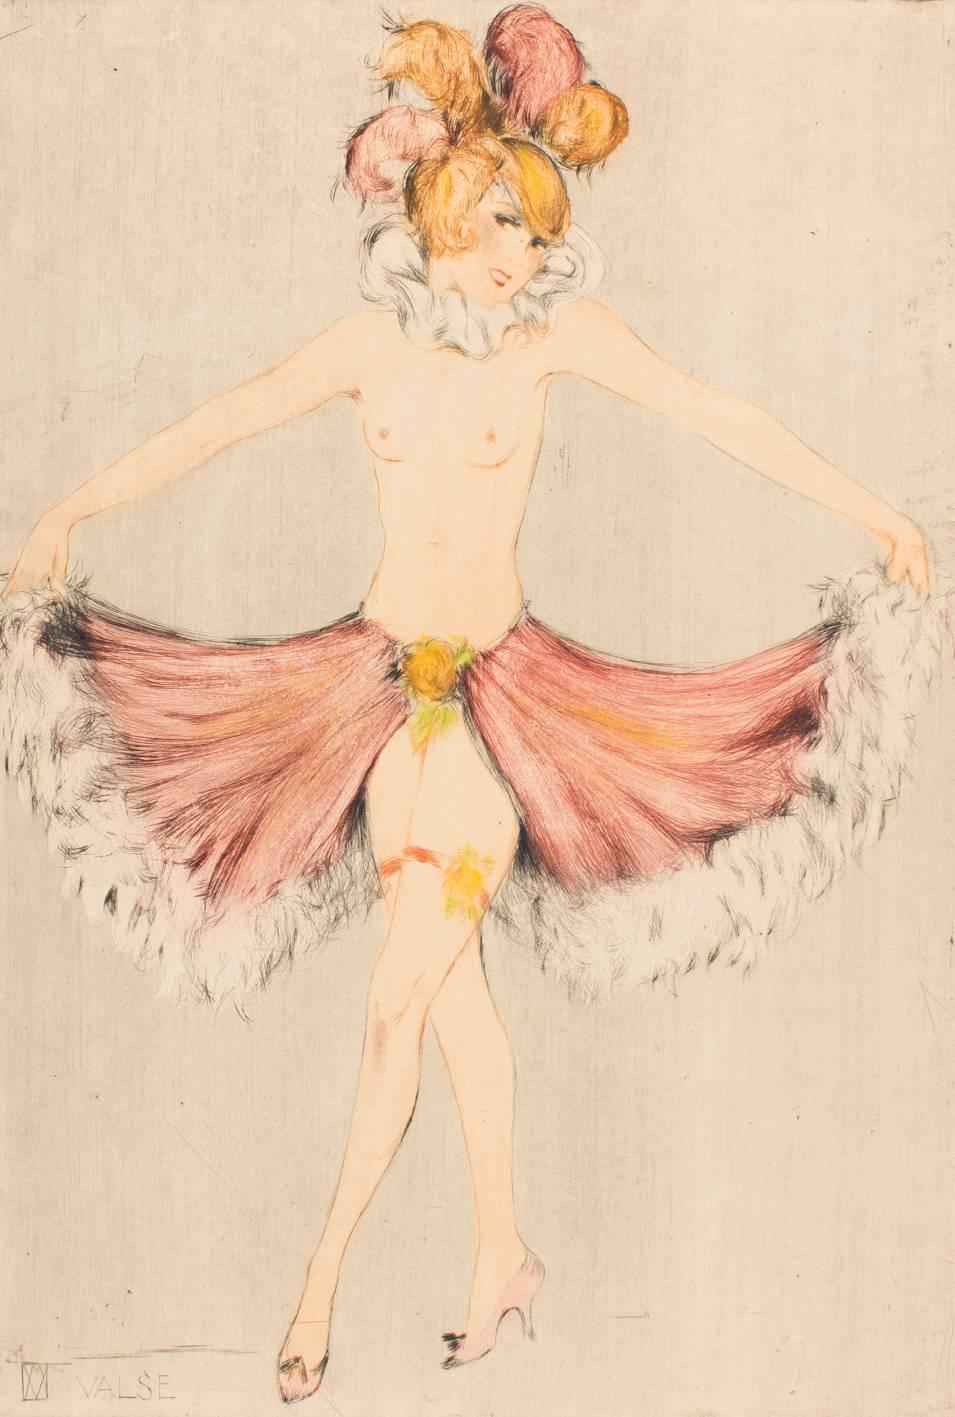 Vala Moro (1907), Vienna 
Art Deco dancing nude “Valse”, circa 1924 
Original colored etching, pencil-signed lower right “Vala Moro” and monogrammed in etching, titled “VALSE”

Vala Moro was an Austrian-Hungarian dancer and artist. She lived in